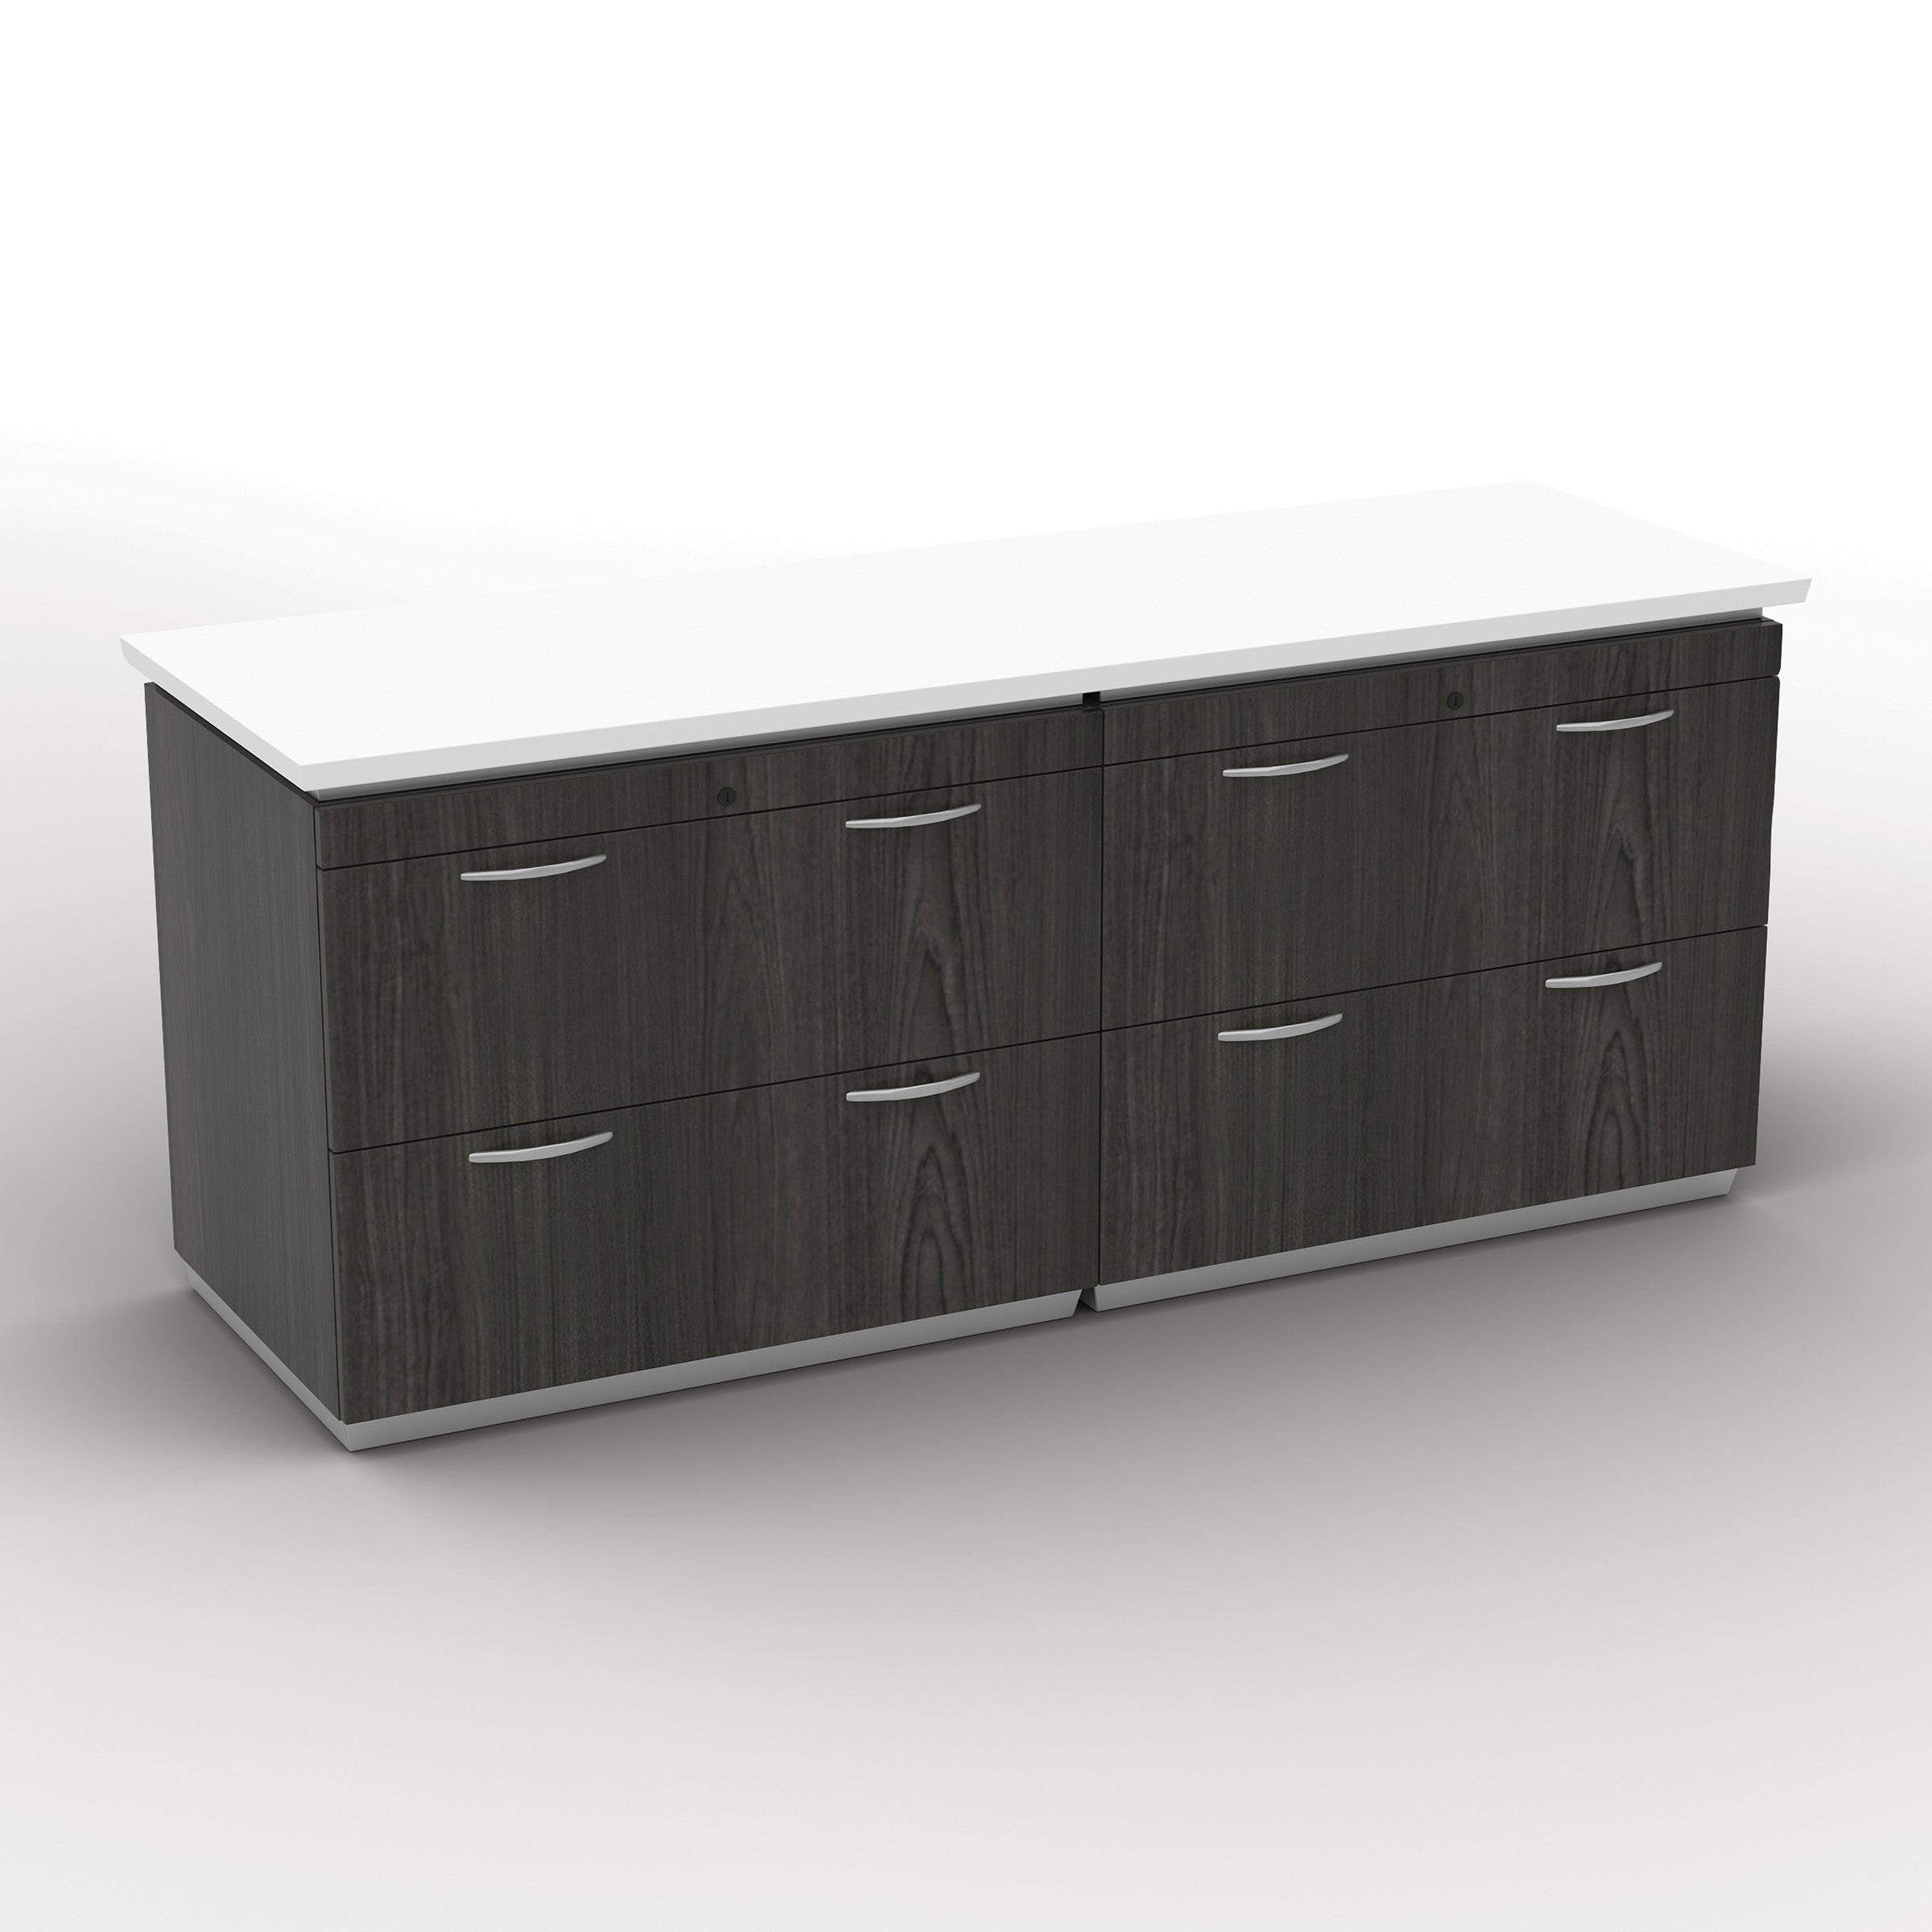 TUX-TYP206 - Tuxedo Series Double Lateral File Credenza by OSP